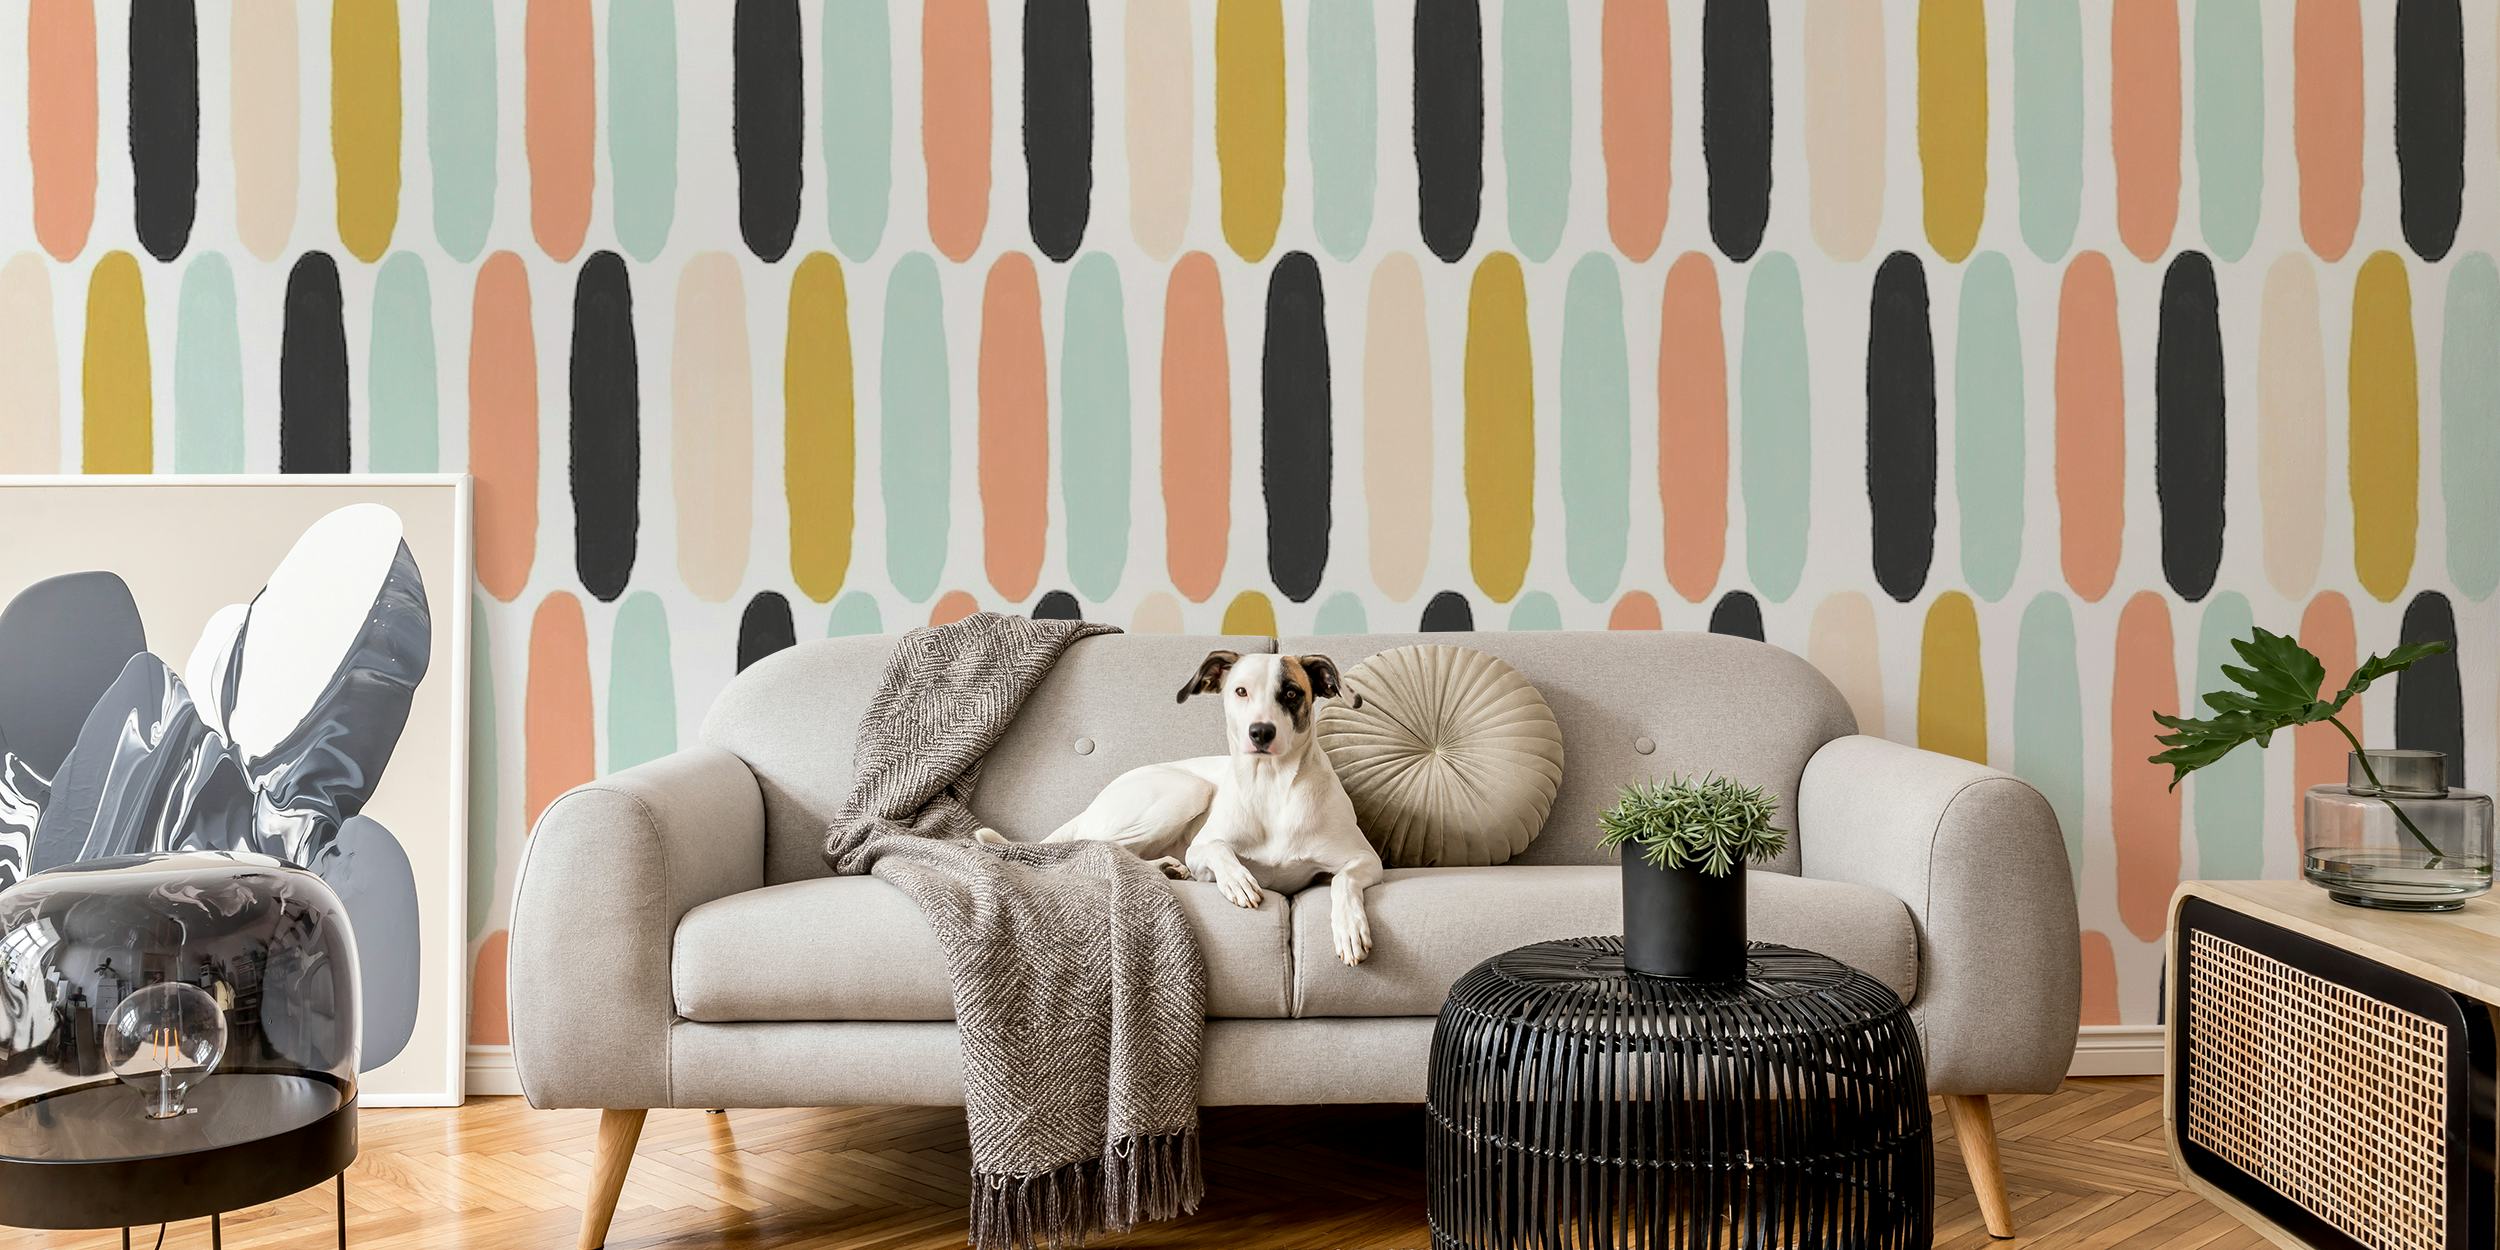 Scandinavian-style wall mural with pastel hues and bold black lines